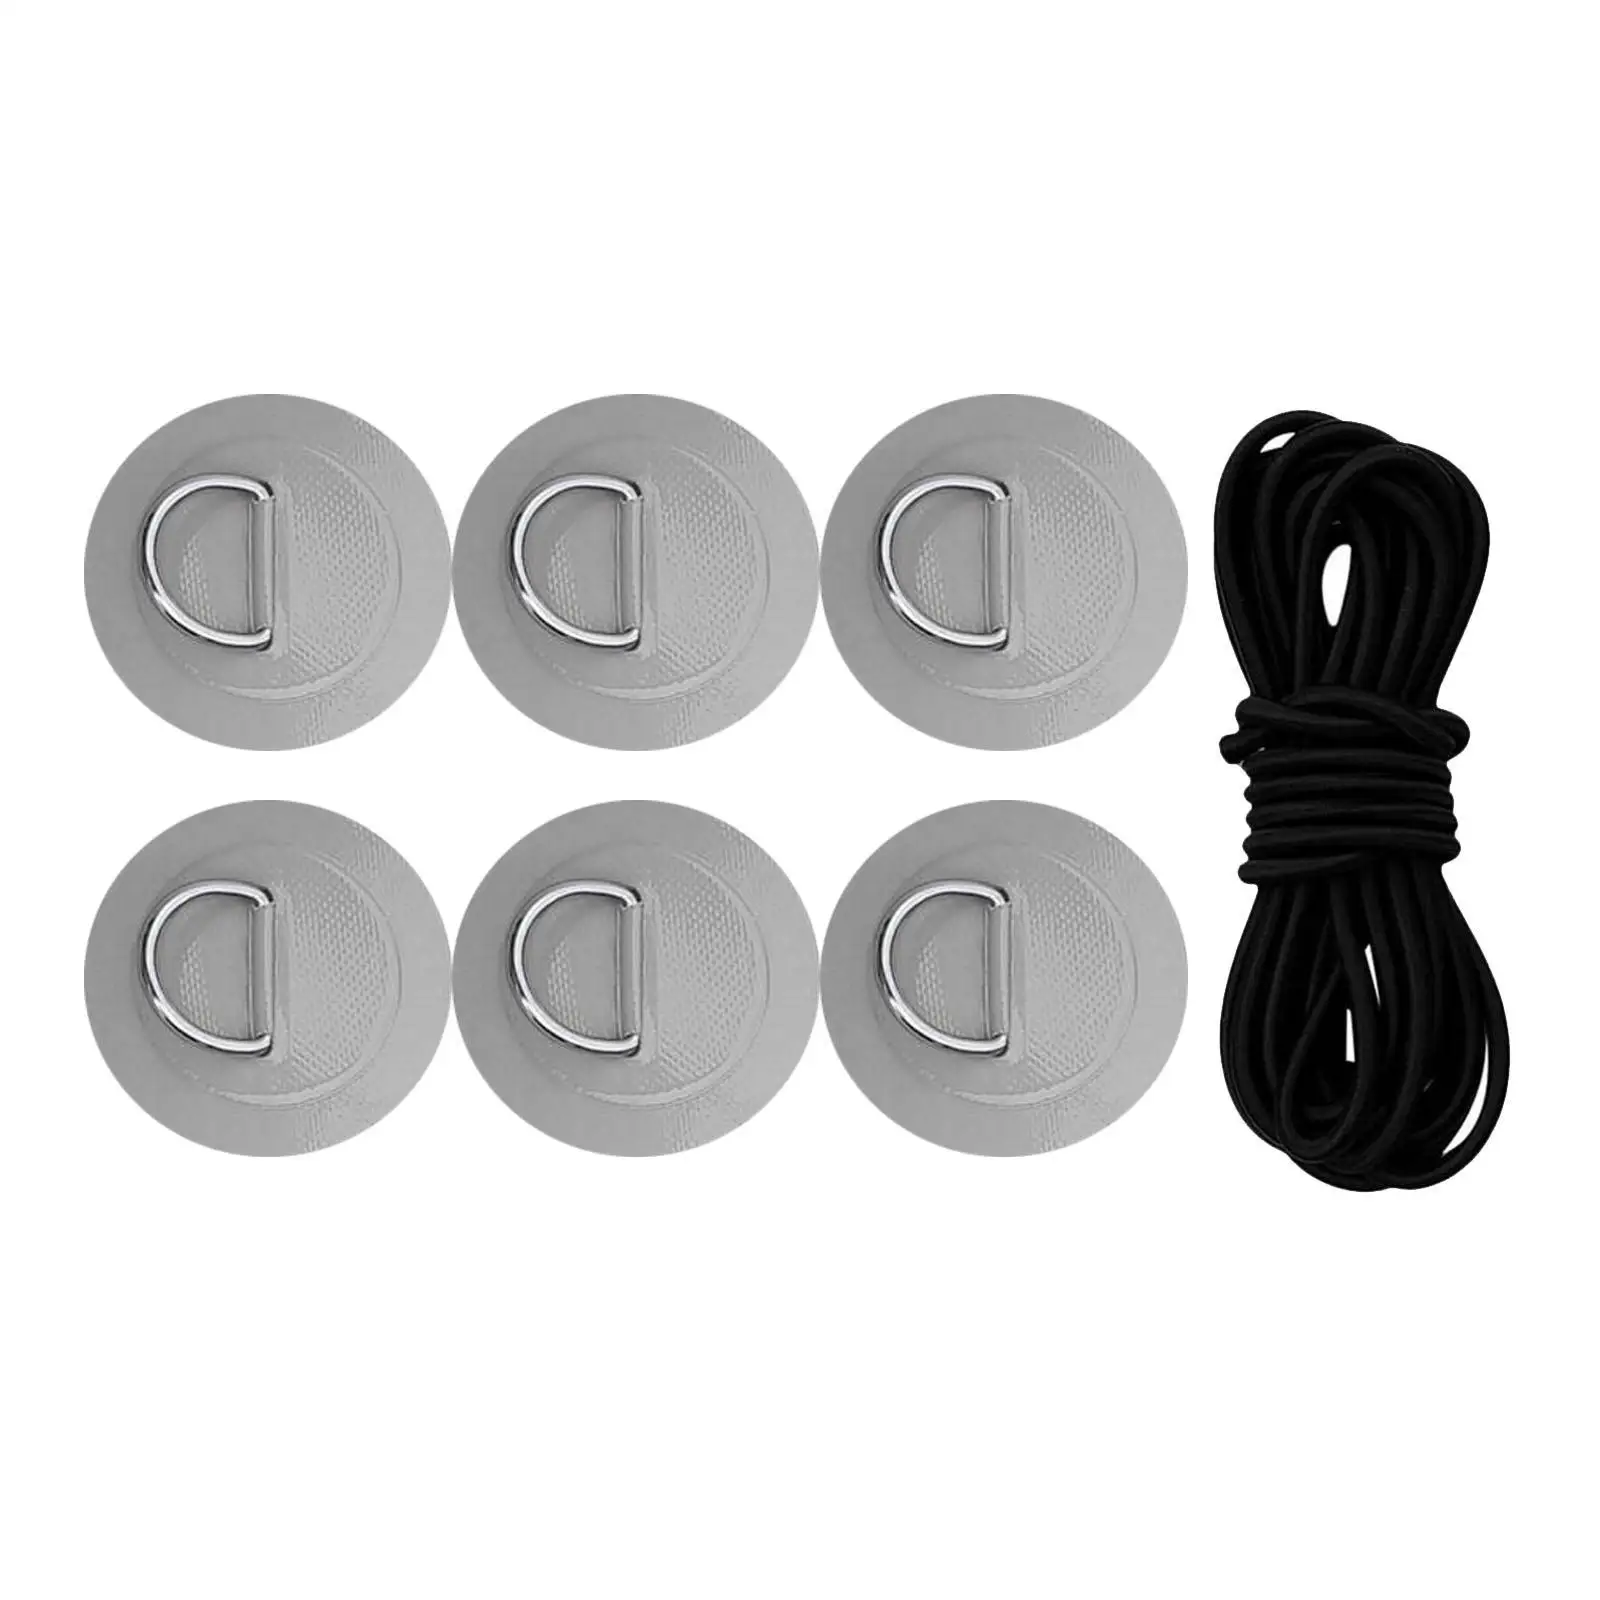 6x D Rings PVC Patch Elastic Bungee Rope Deck Attachment Kit Deck Rigging Kit for Paddleboard Canoe Dinghy Raft Inflatable Boat